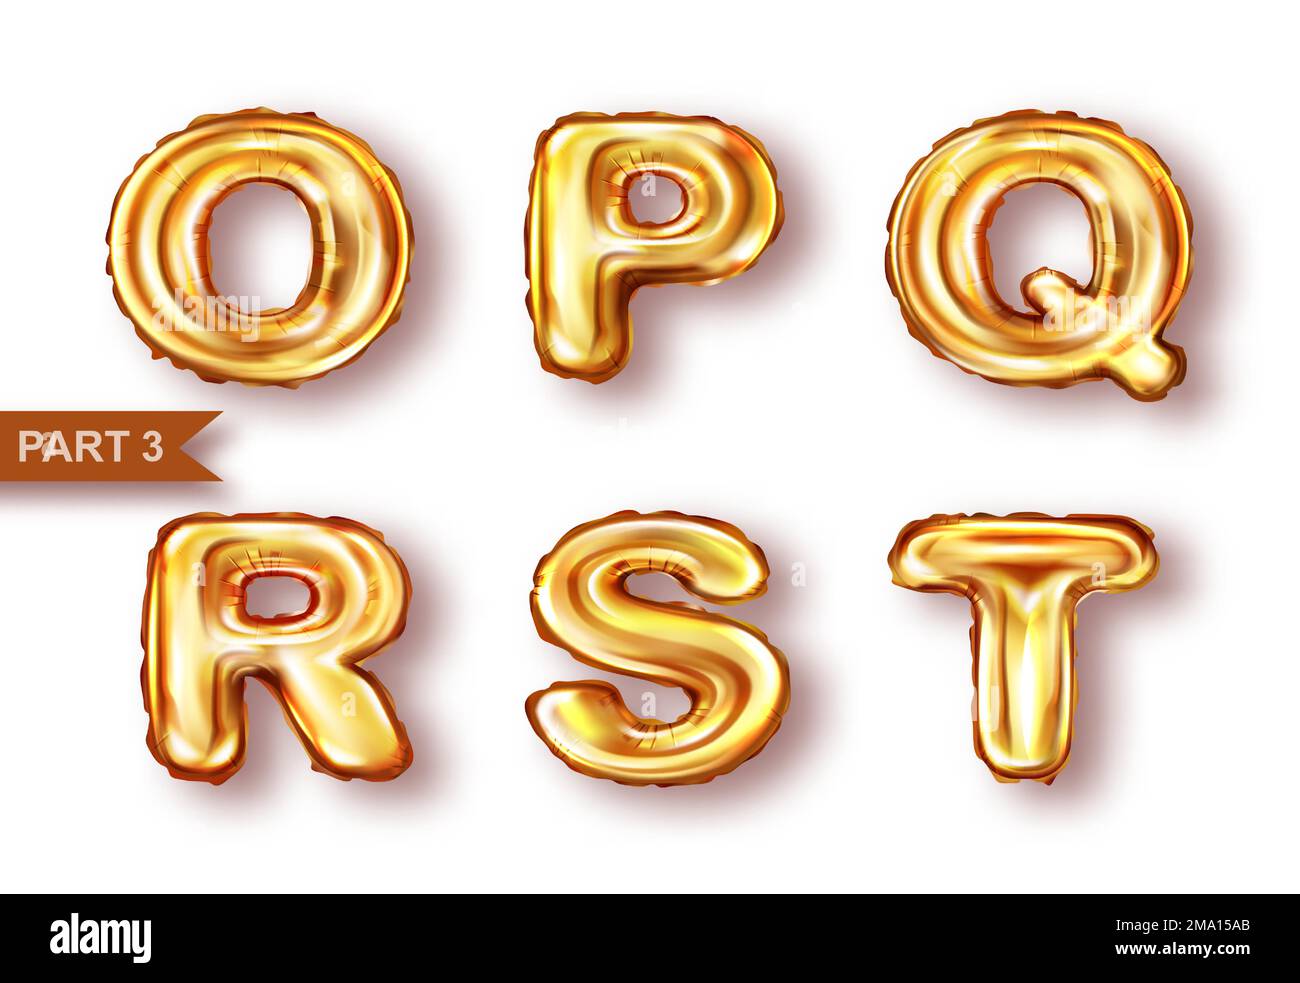 Alphabet golden balloons realistic vector. Inflatable golden letters of metal foil for childrens parties, shining font isolated on white background, part 3 Stock Vector